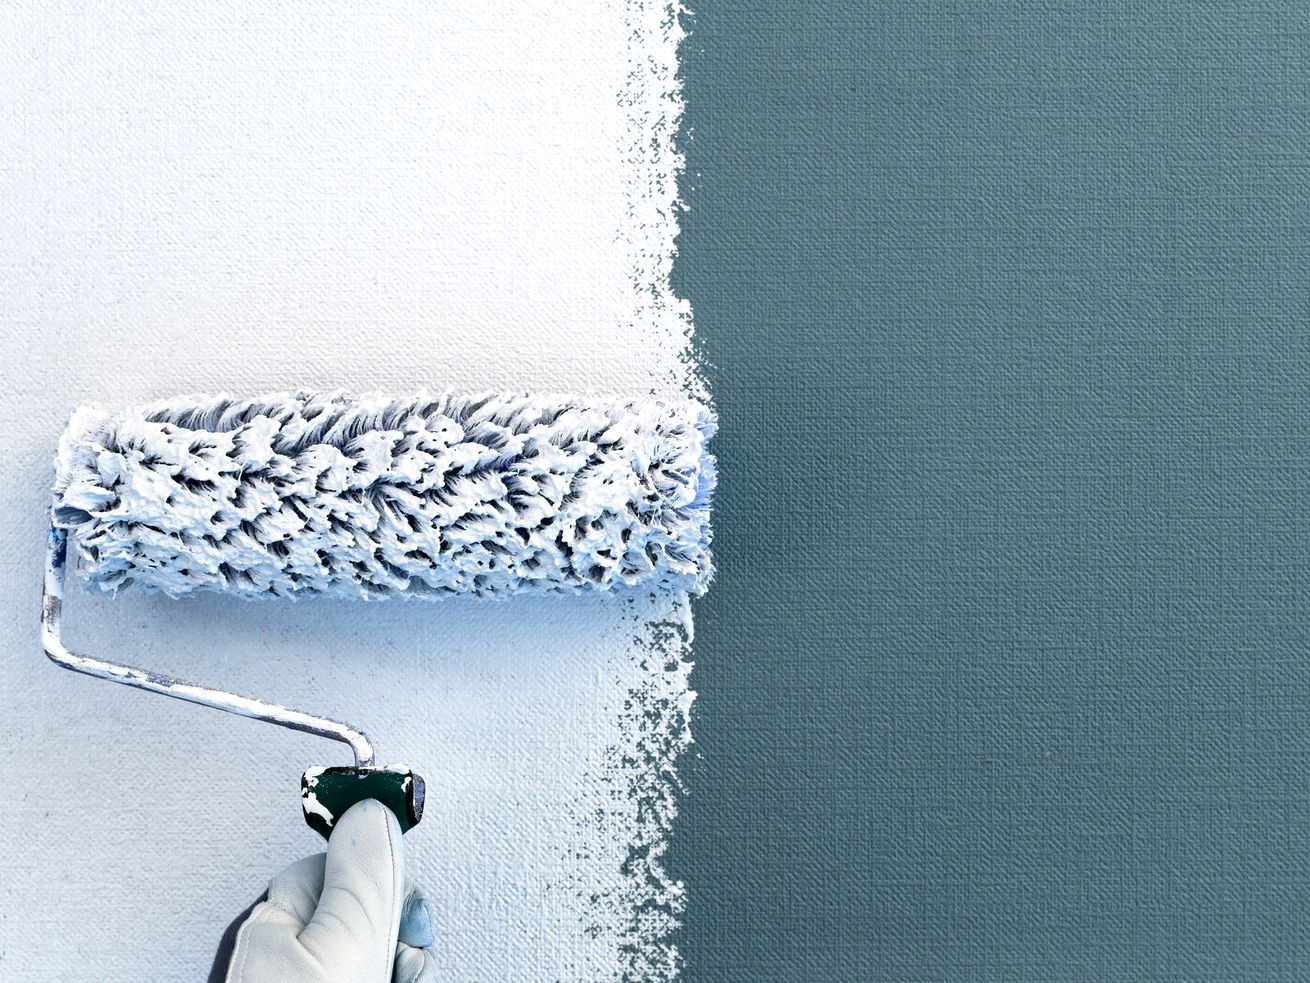 Paint Over Wallpaper with a roller brush.